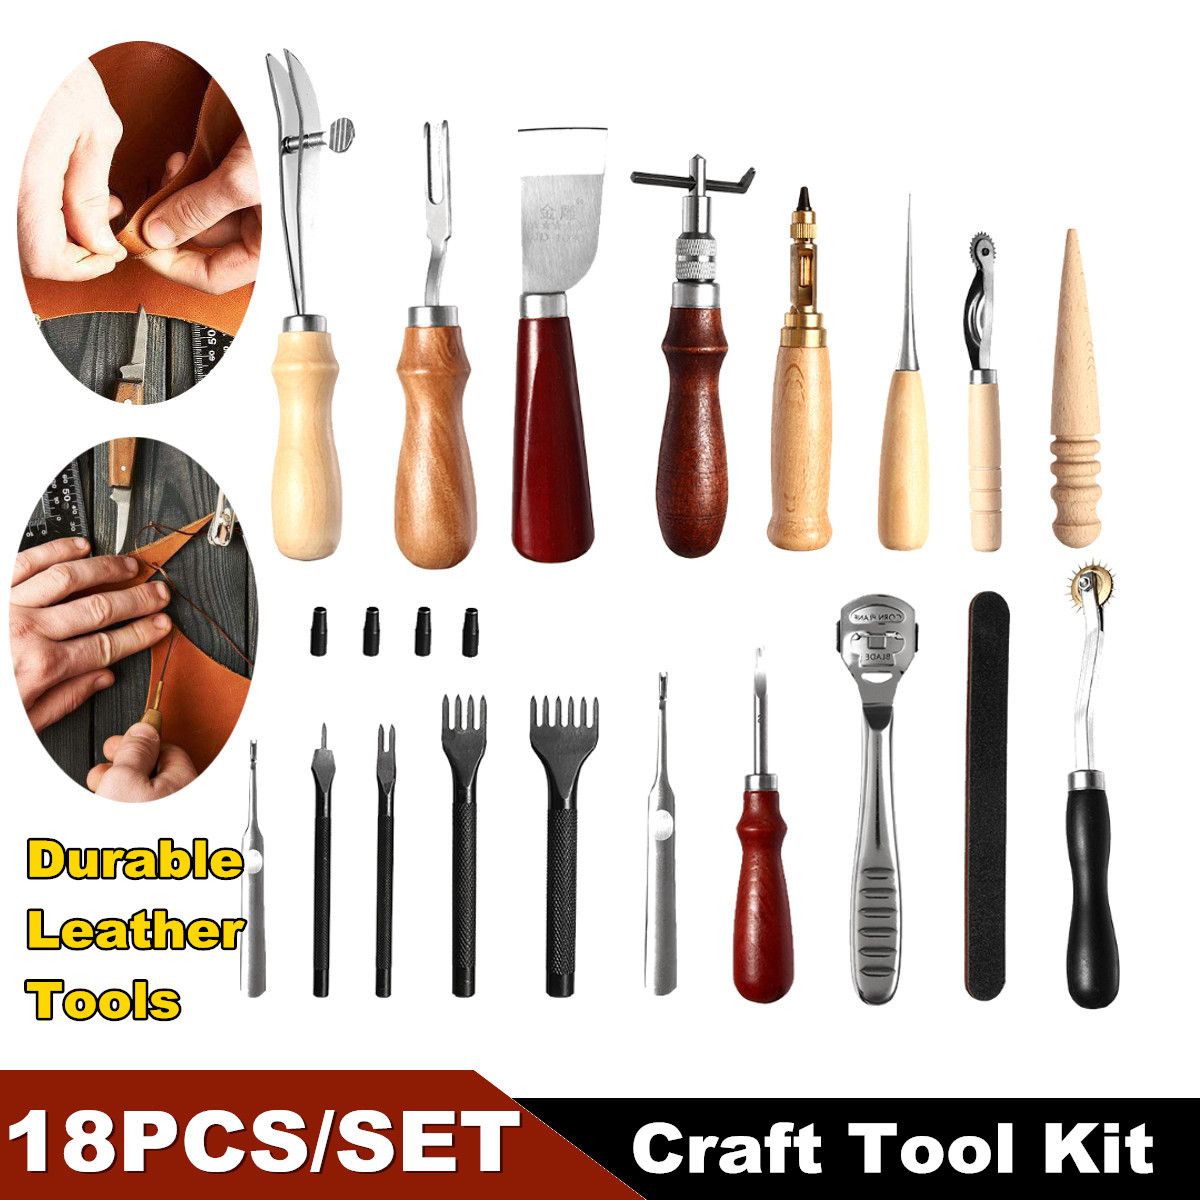 Leather-Craft-Tool-Kit-18pcs-Stitching-Carving-Working-Sewing-Saddle-Groover-Leather-Craft-DIY-Tool-1311436